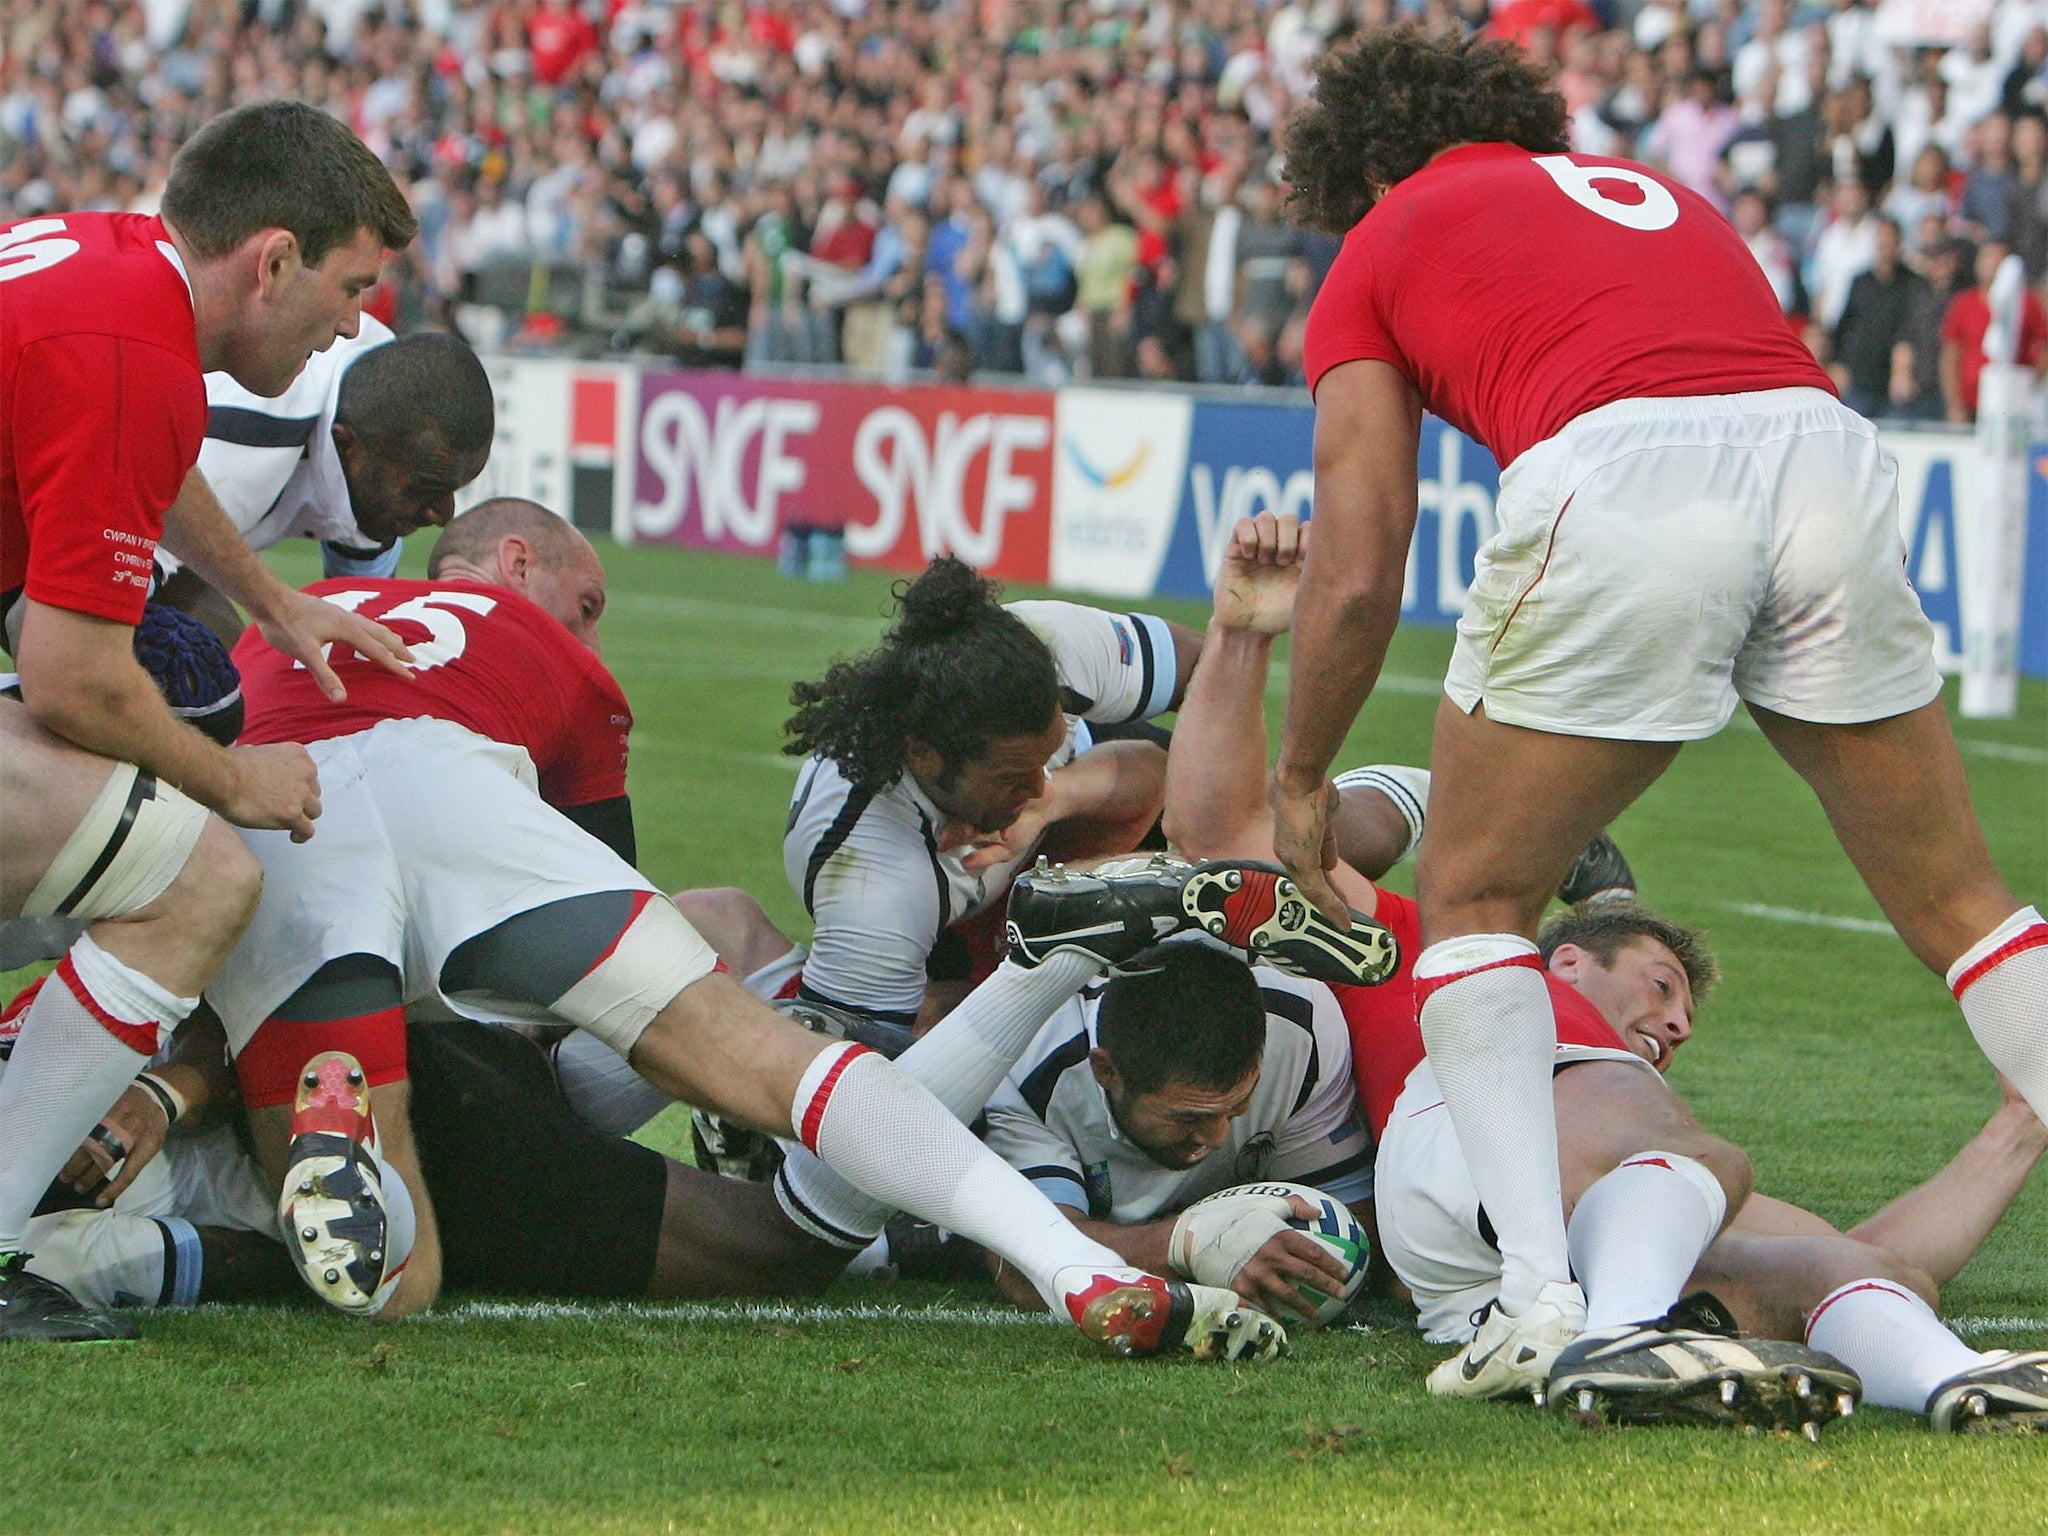 Fiji prop Graham Dewes bustles over for the match-winning try against Wales with four minutes left in Nantes in 2007 after the Welsh had come back from a 25-3 deficit to take the lead